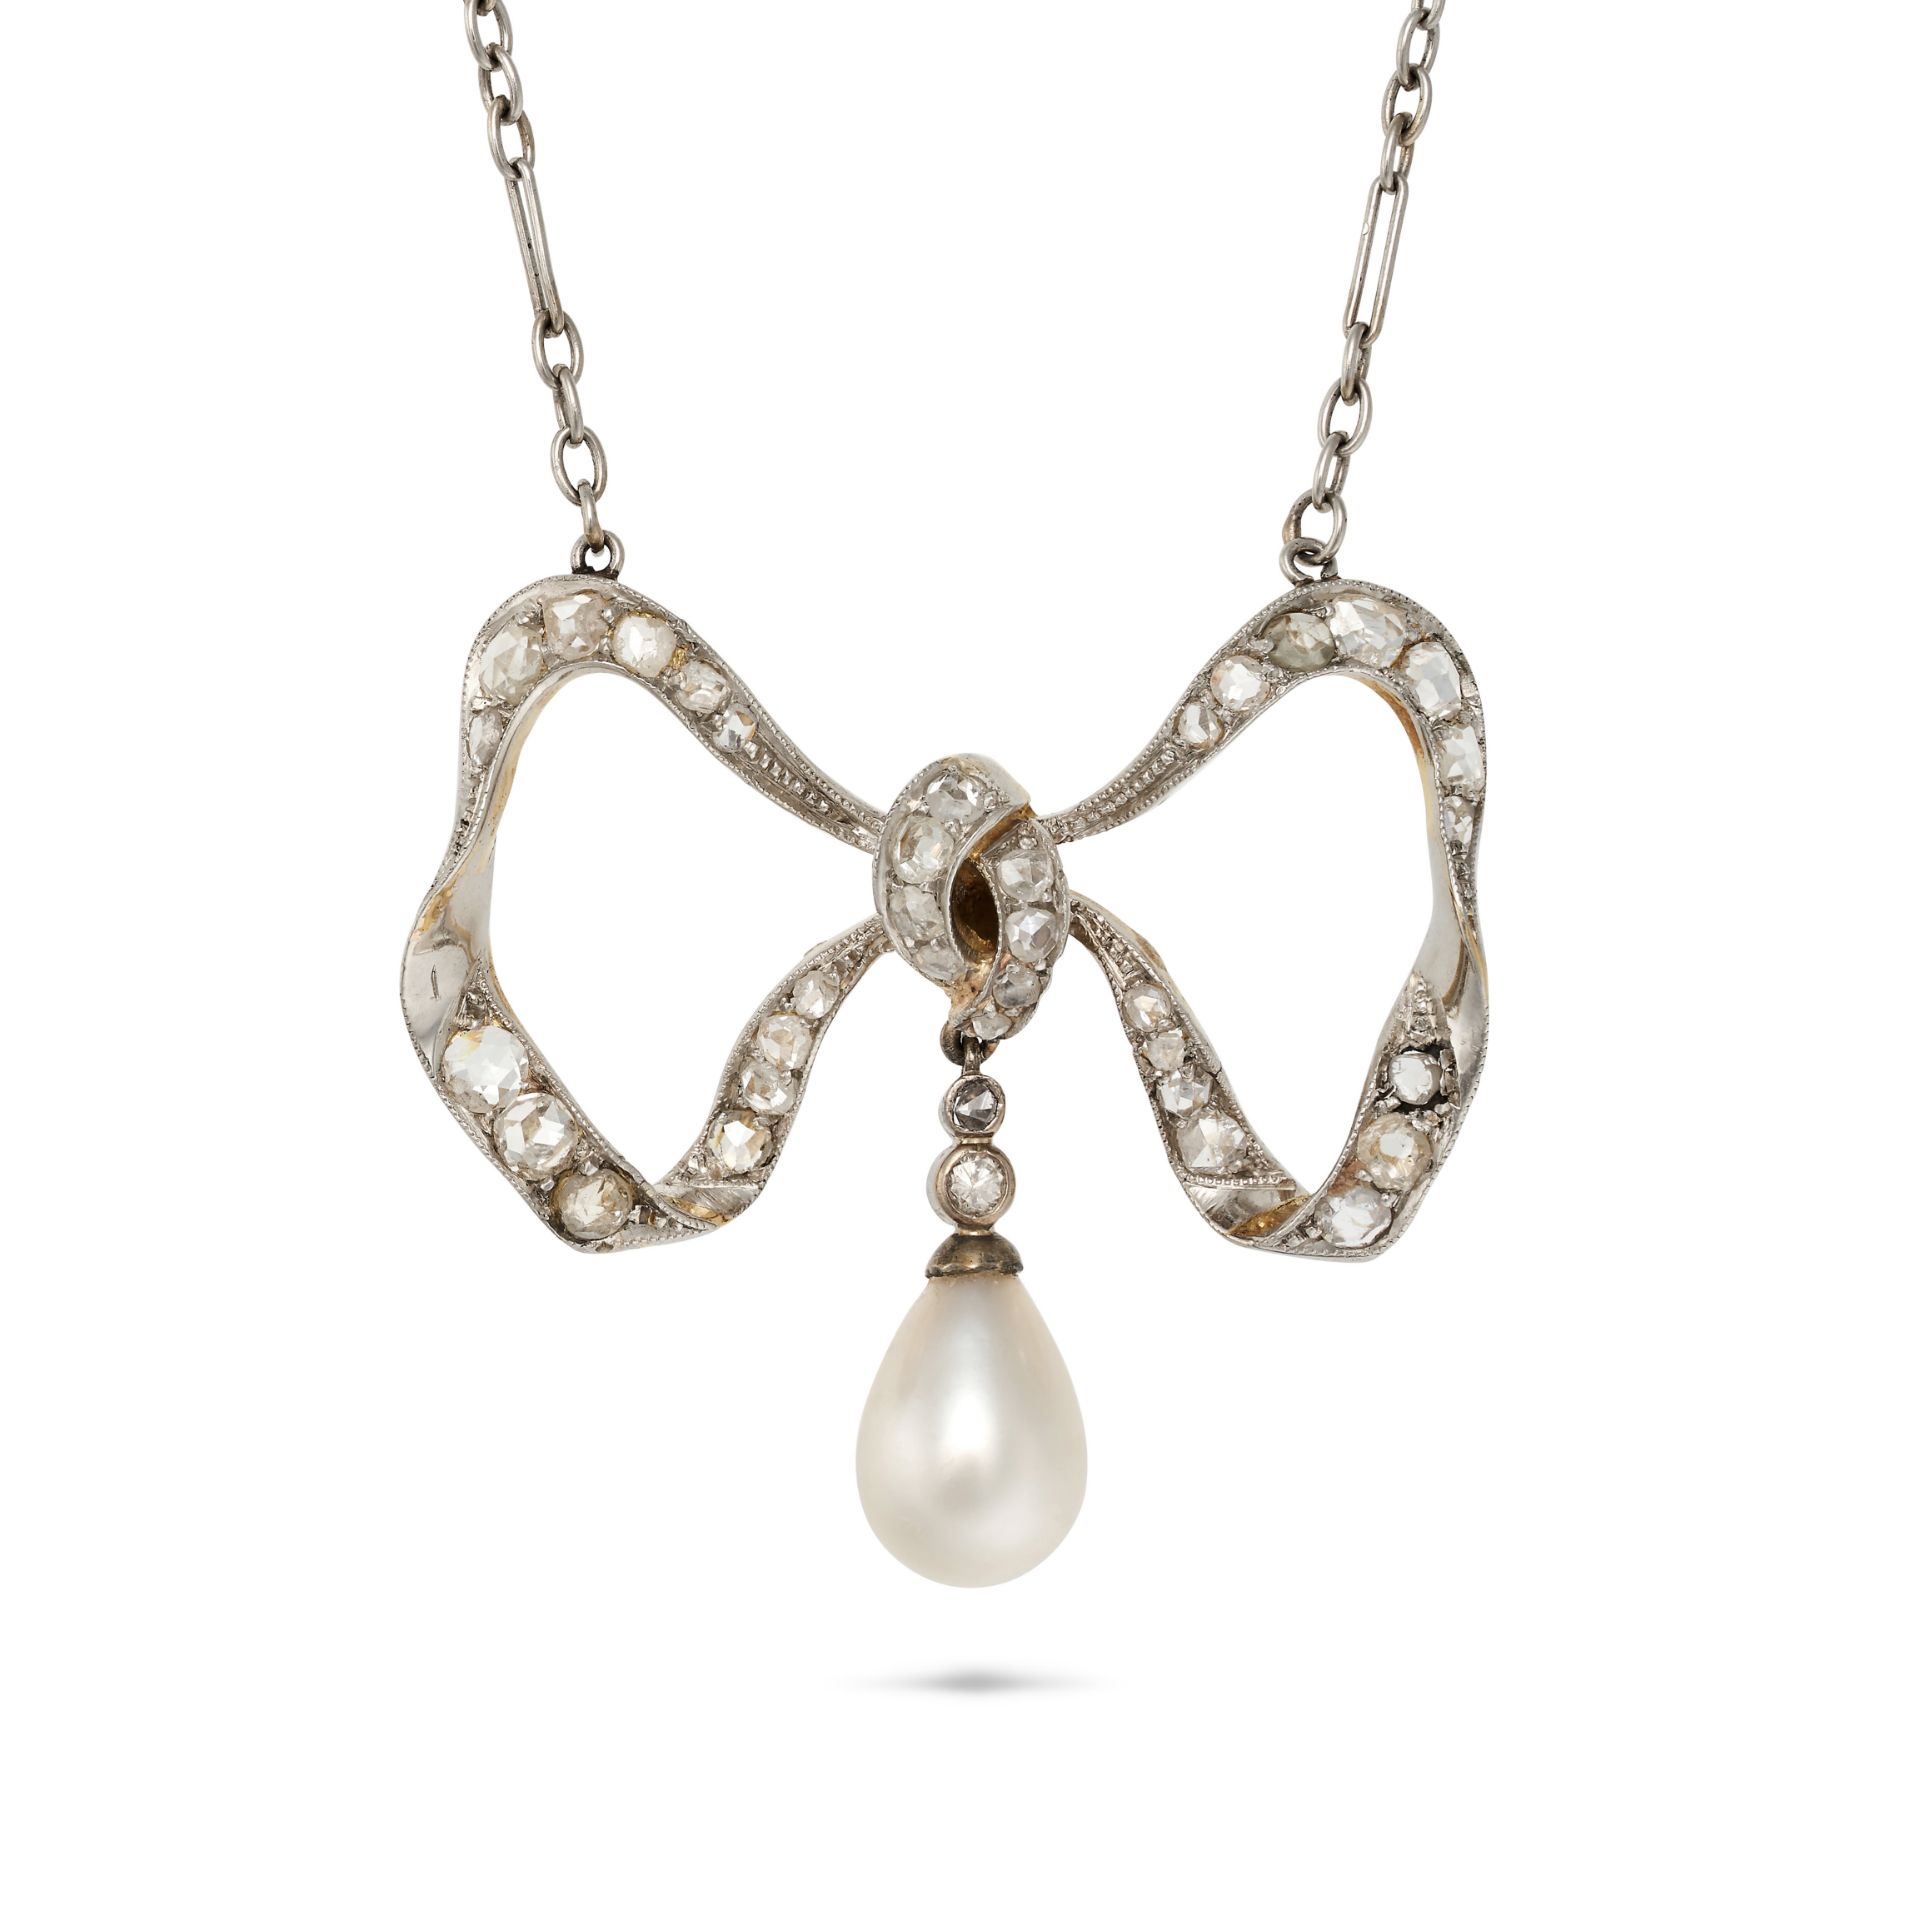 AN ANTIQUE NATURAL SALTWATER PEARL AND DIAMOND PENDANT NECKLACE in yellow gold and silver, the pe...